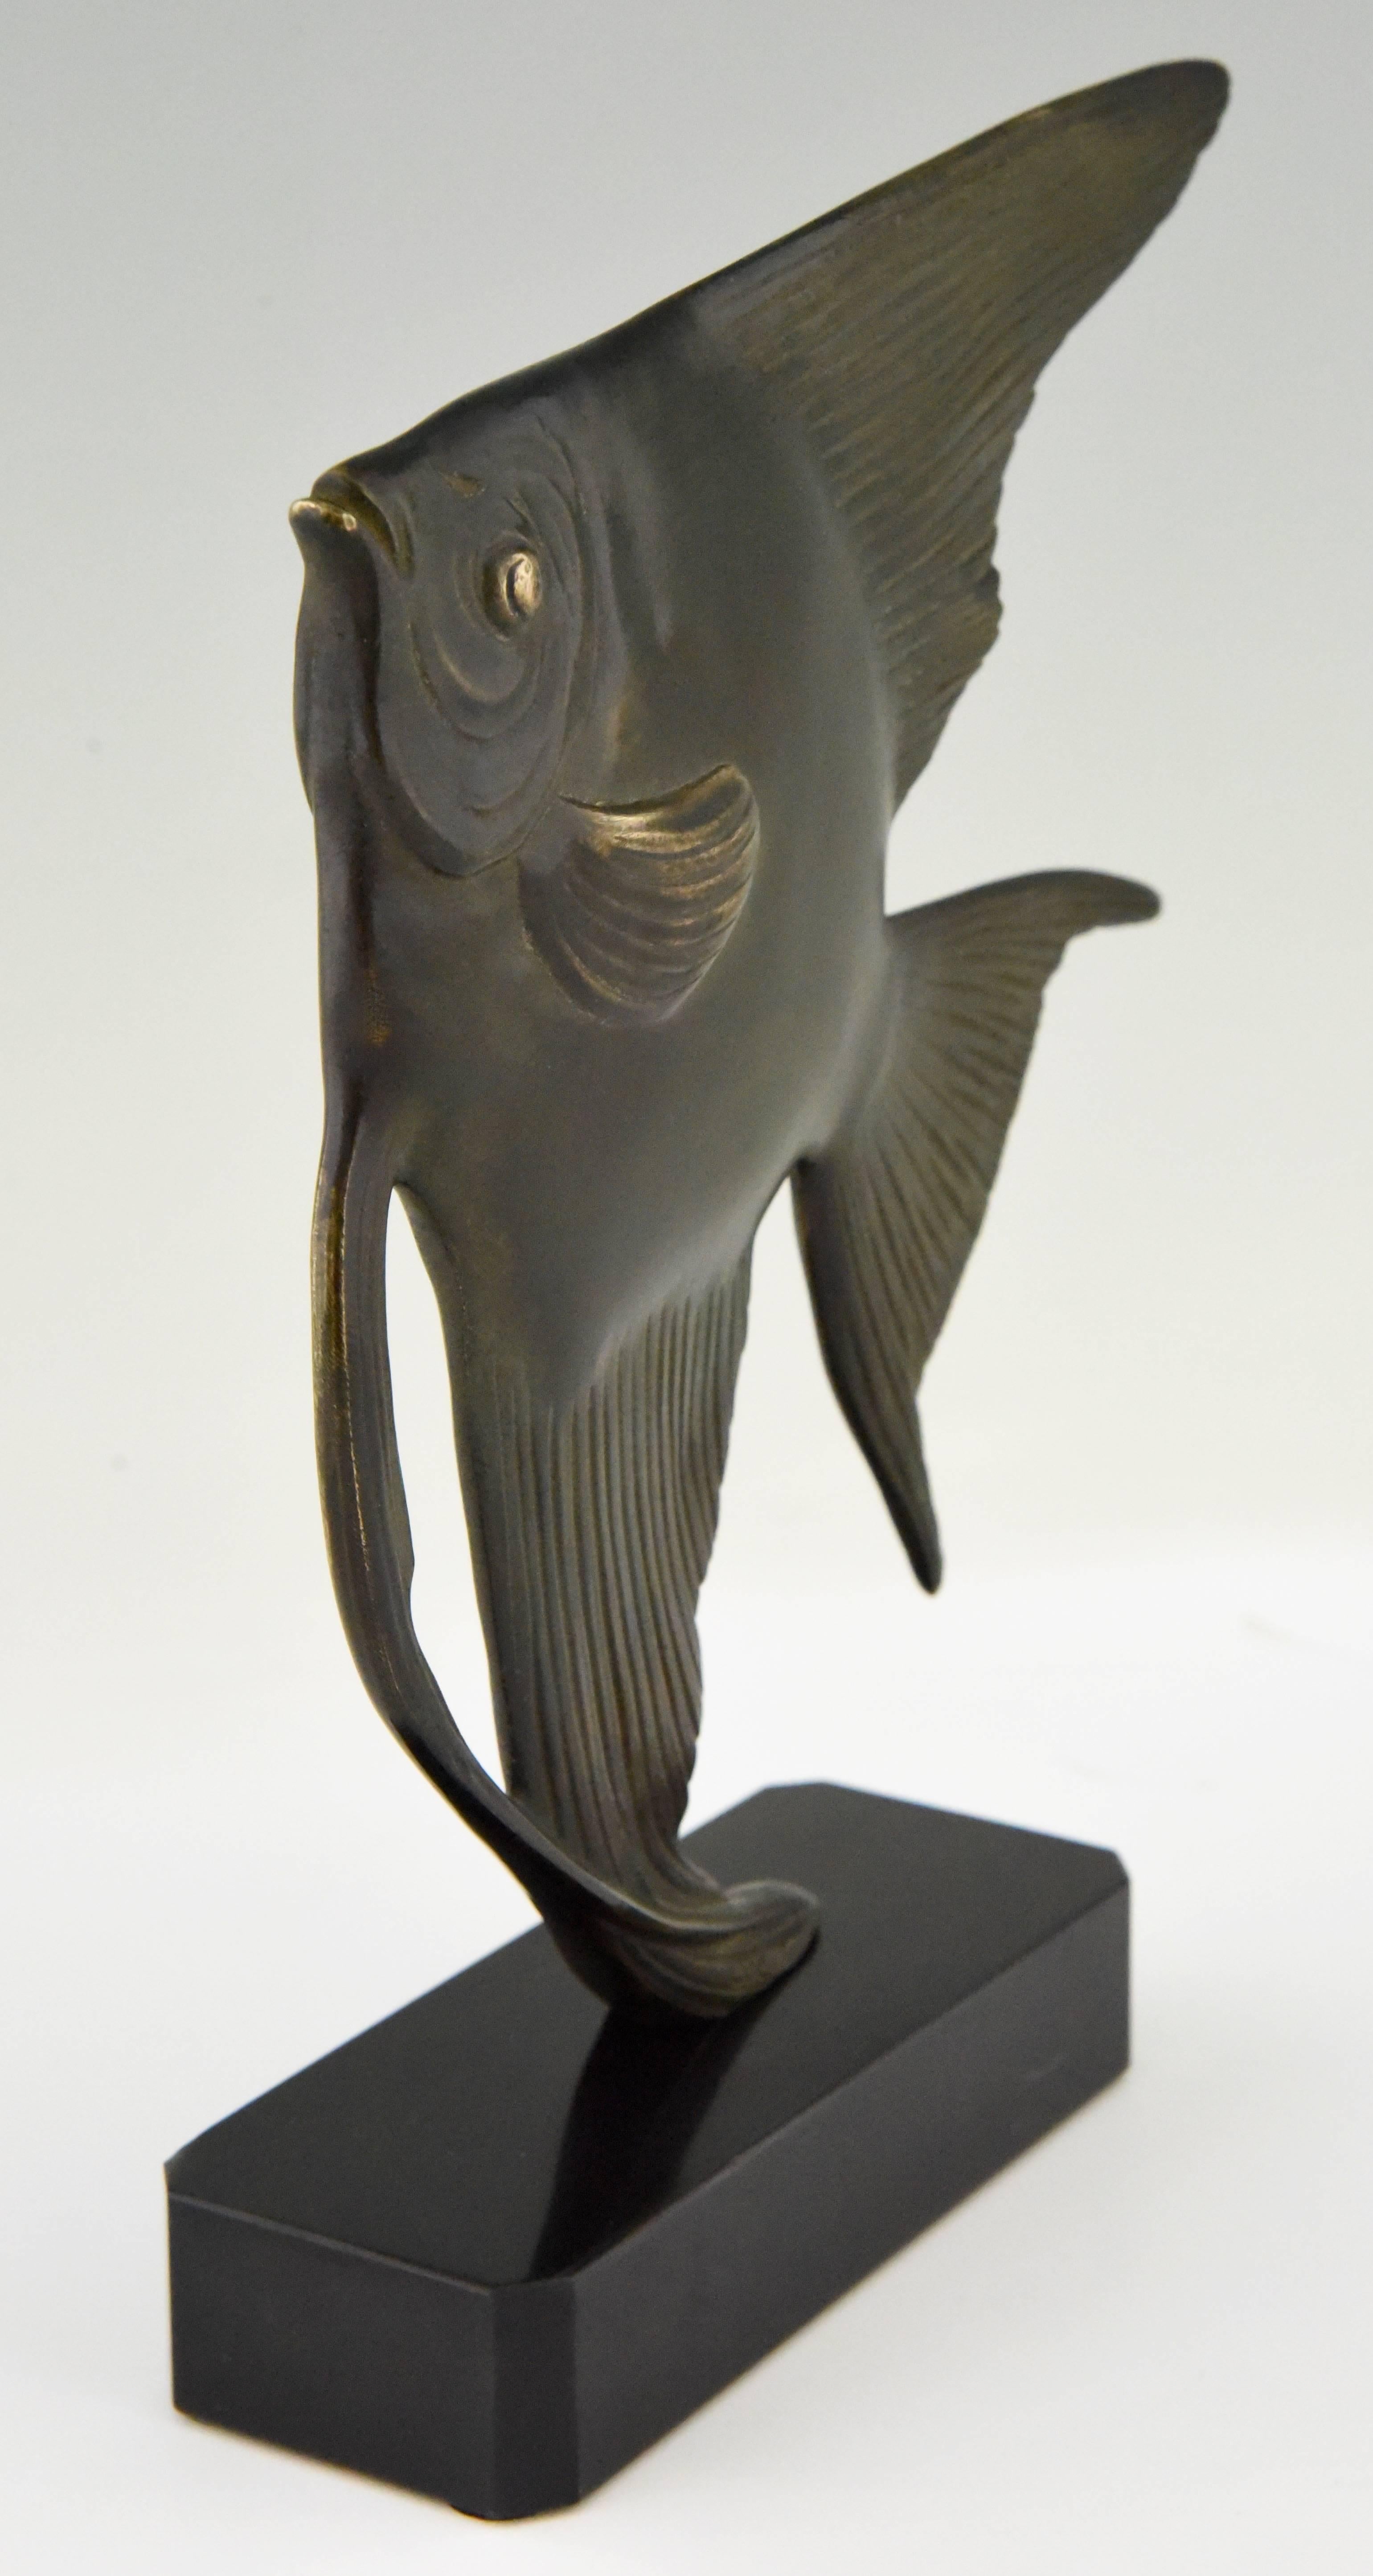 20th Century Art Deco Bronze Sculpture of a Fish by Luc on Marble Base, France 1930